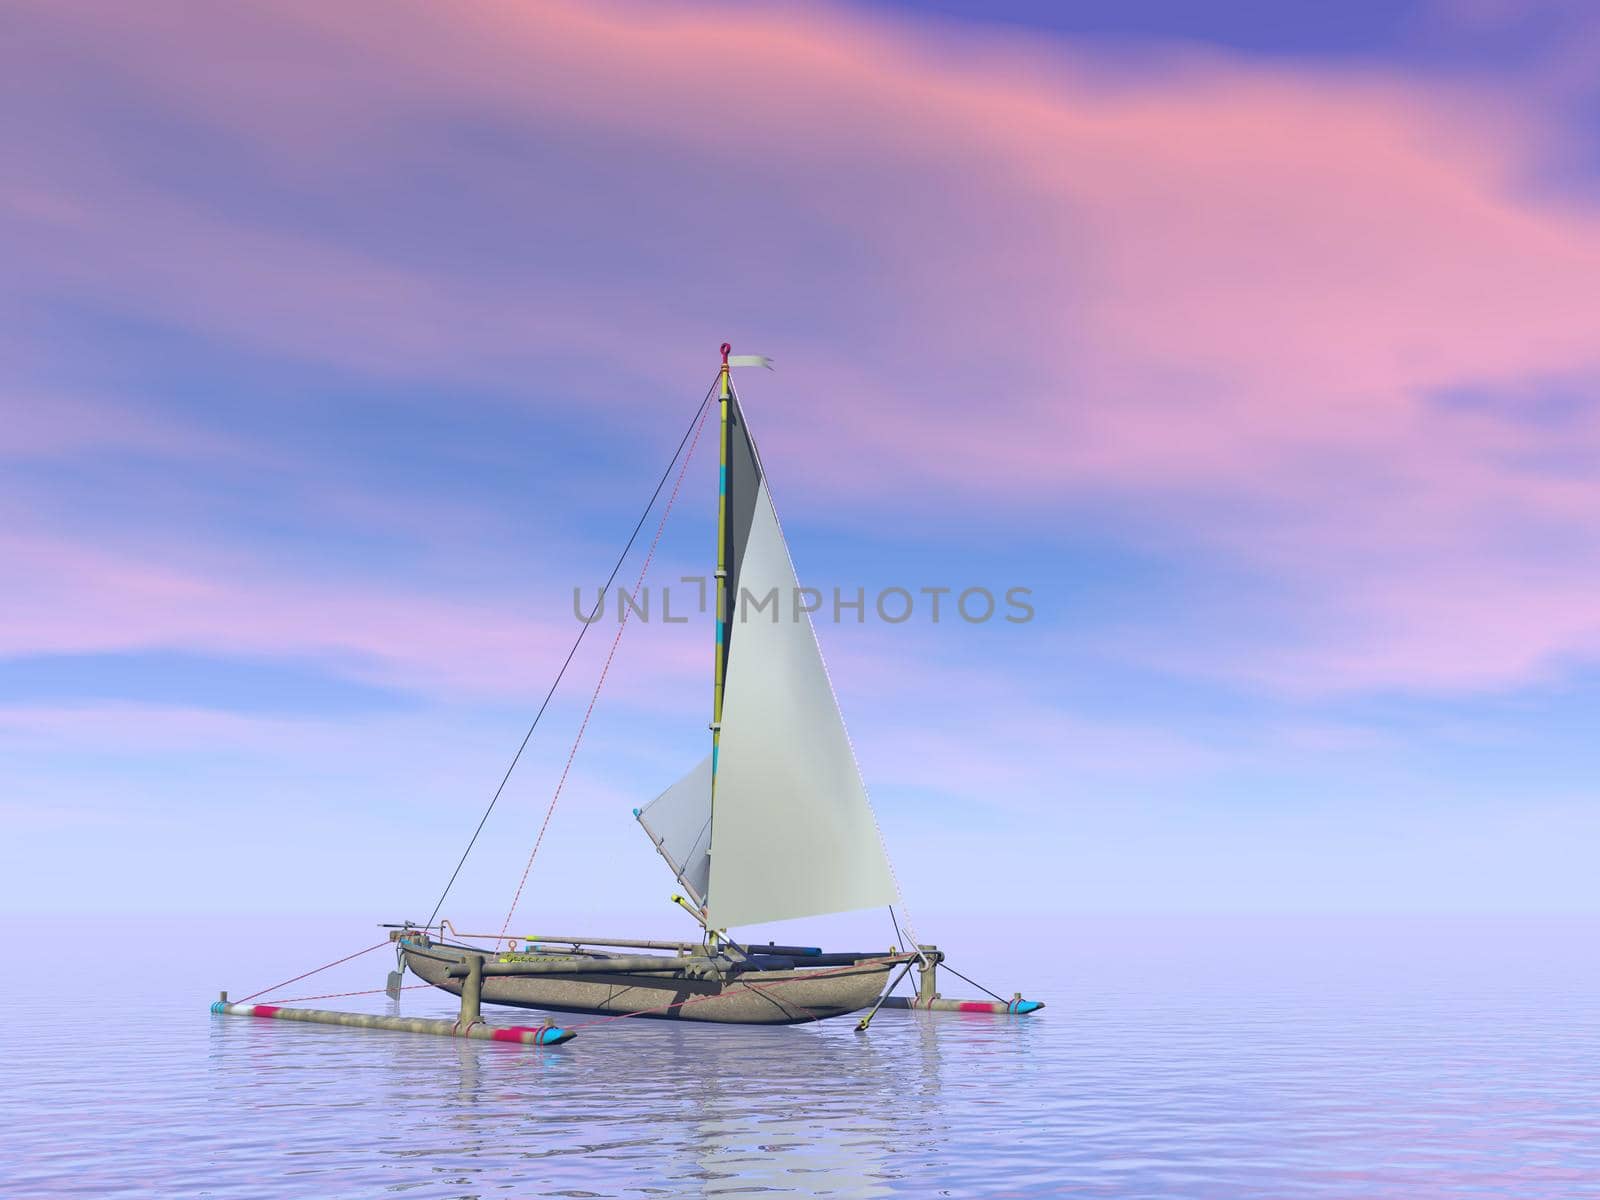 Single trimaran boat floating on the water by pink sunset